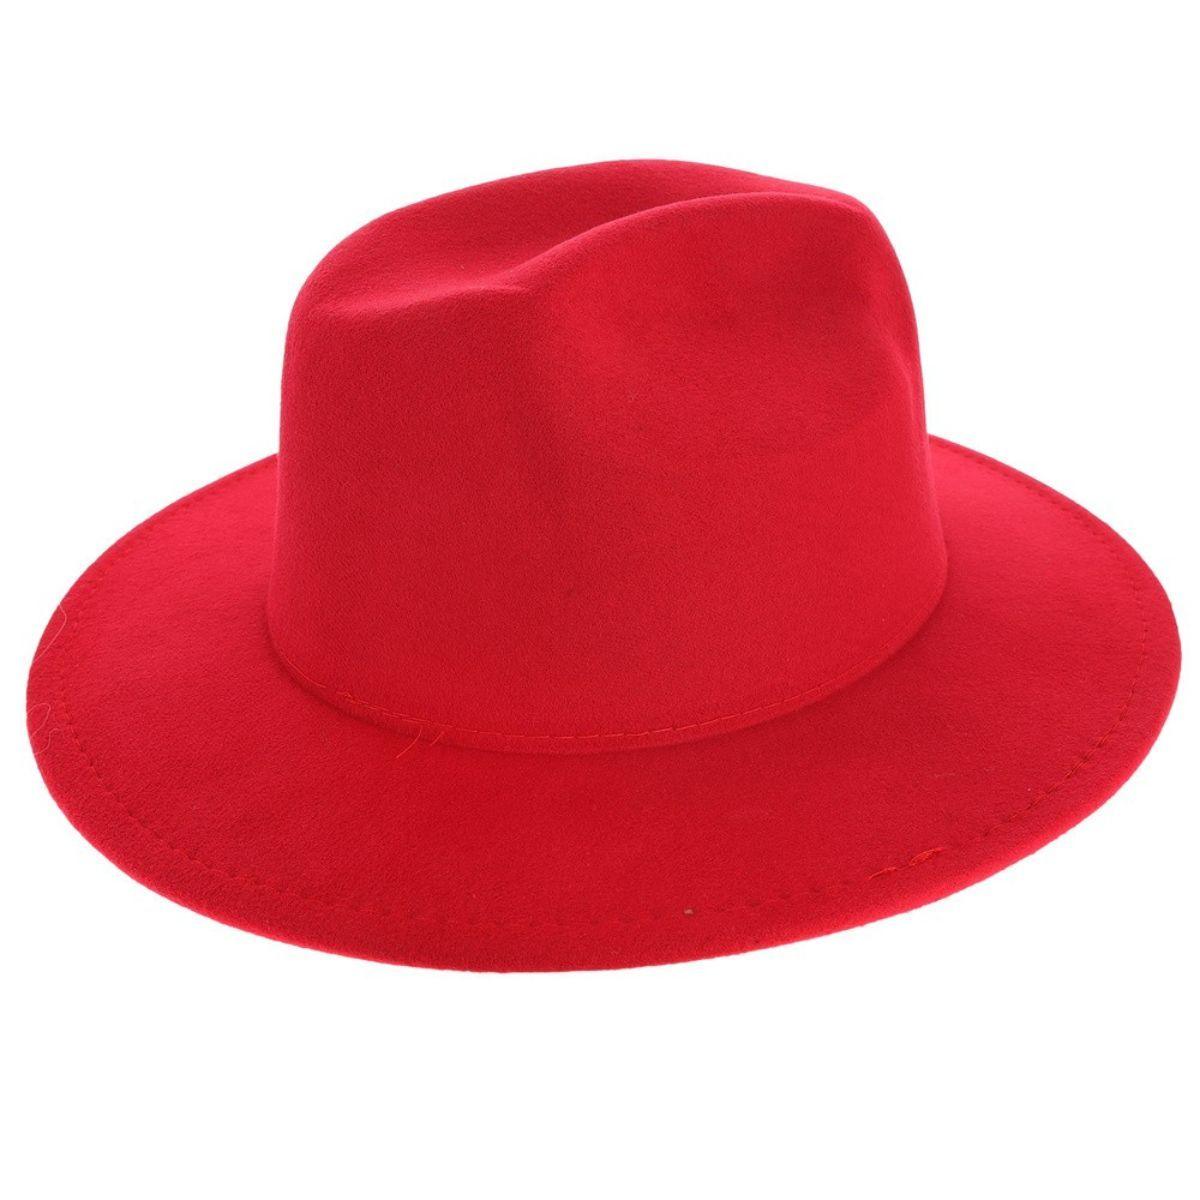 Stylish Red Fedora Hat for Women - Shop Now and Elevate Your Look